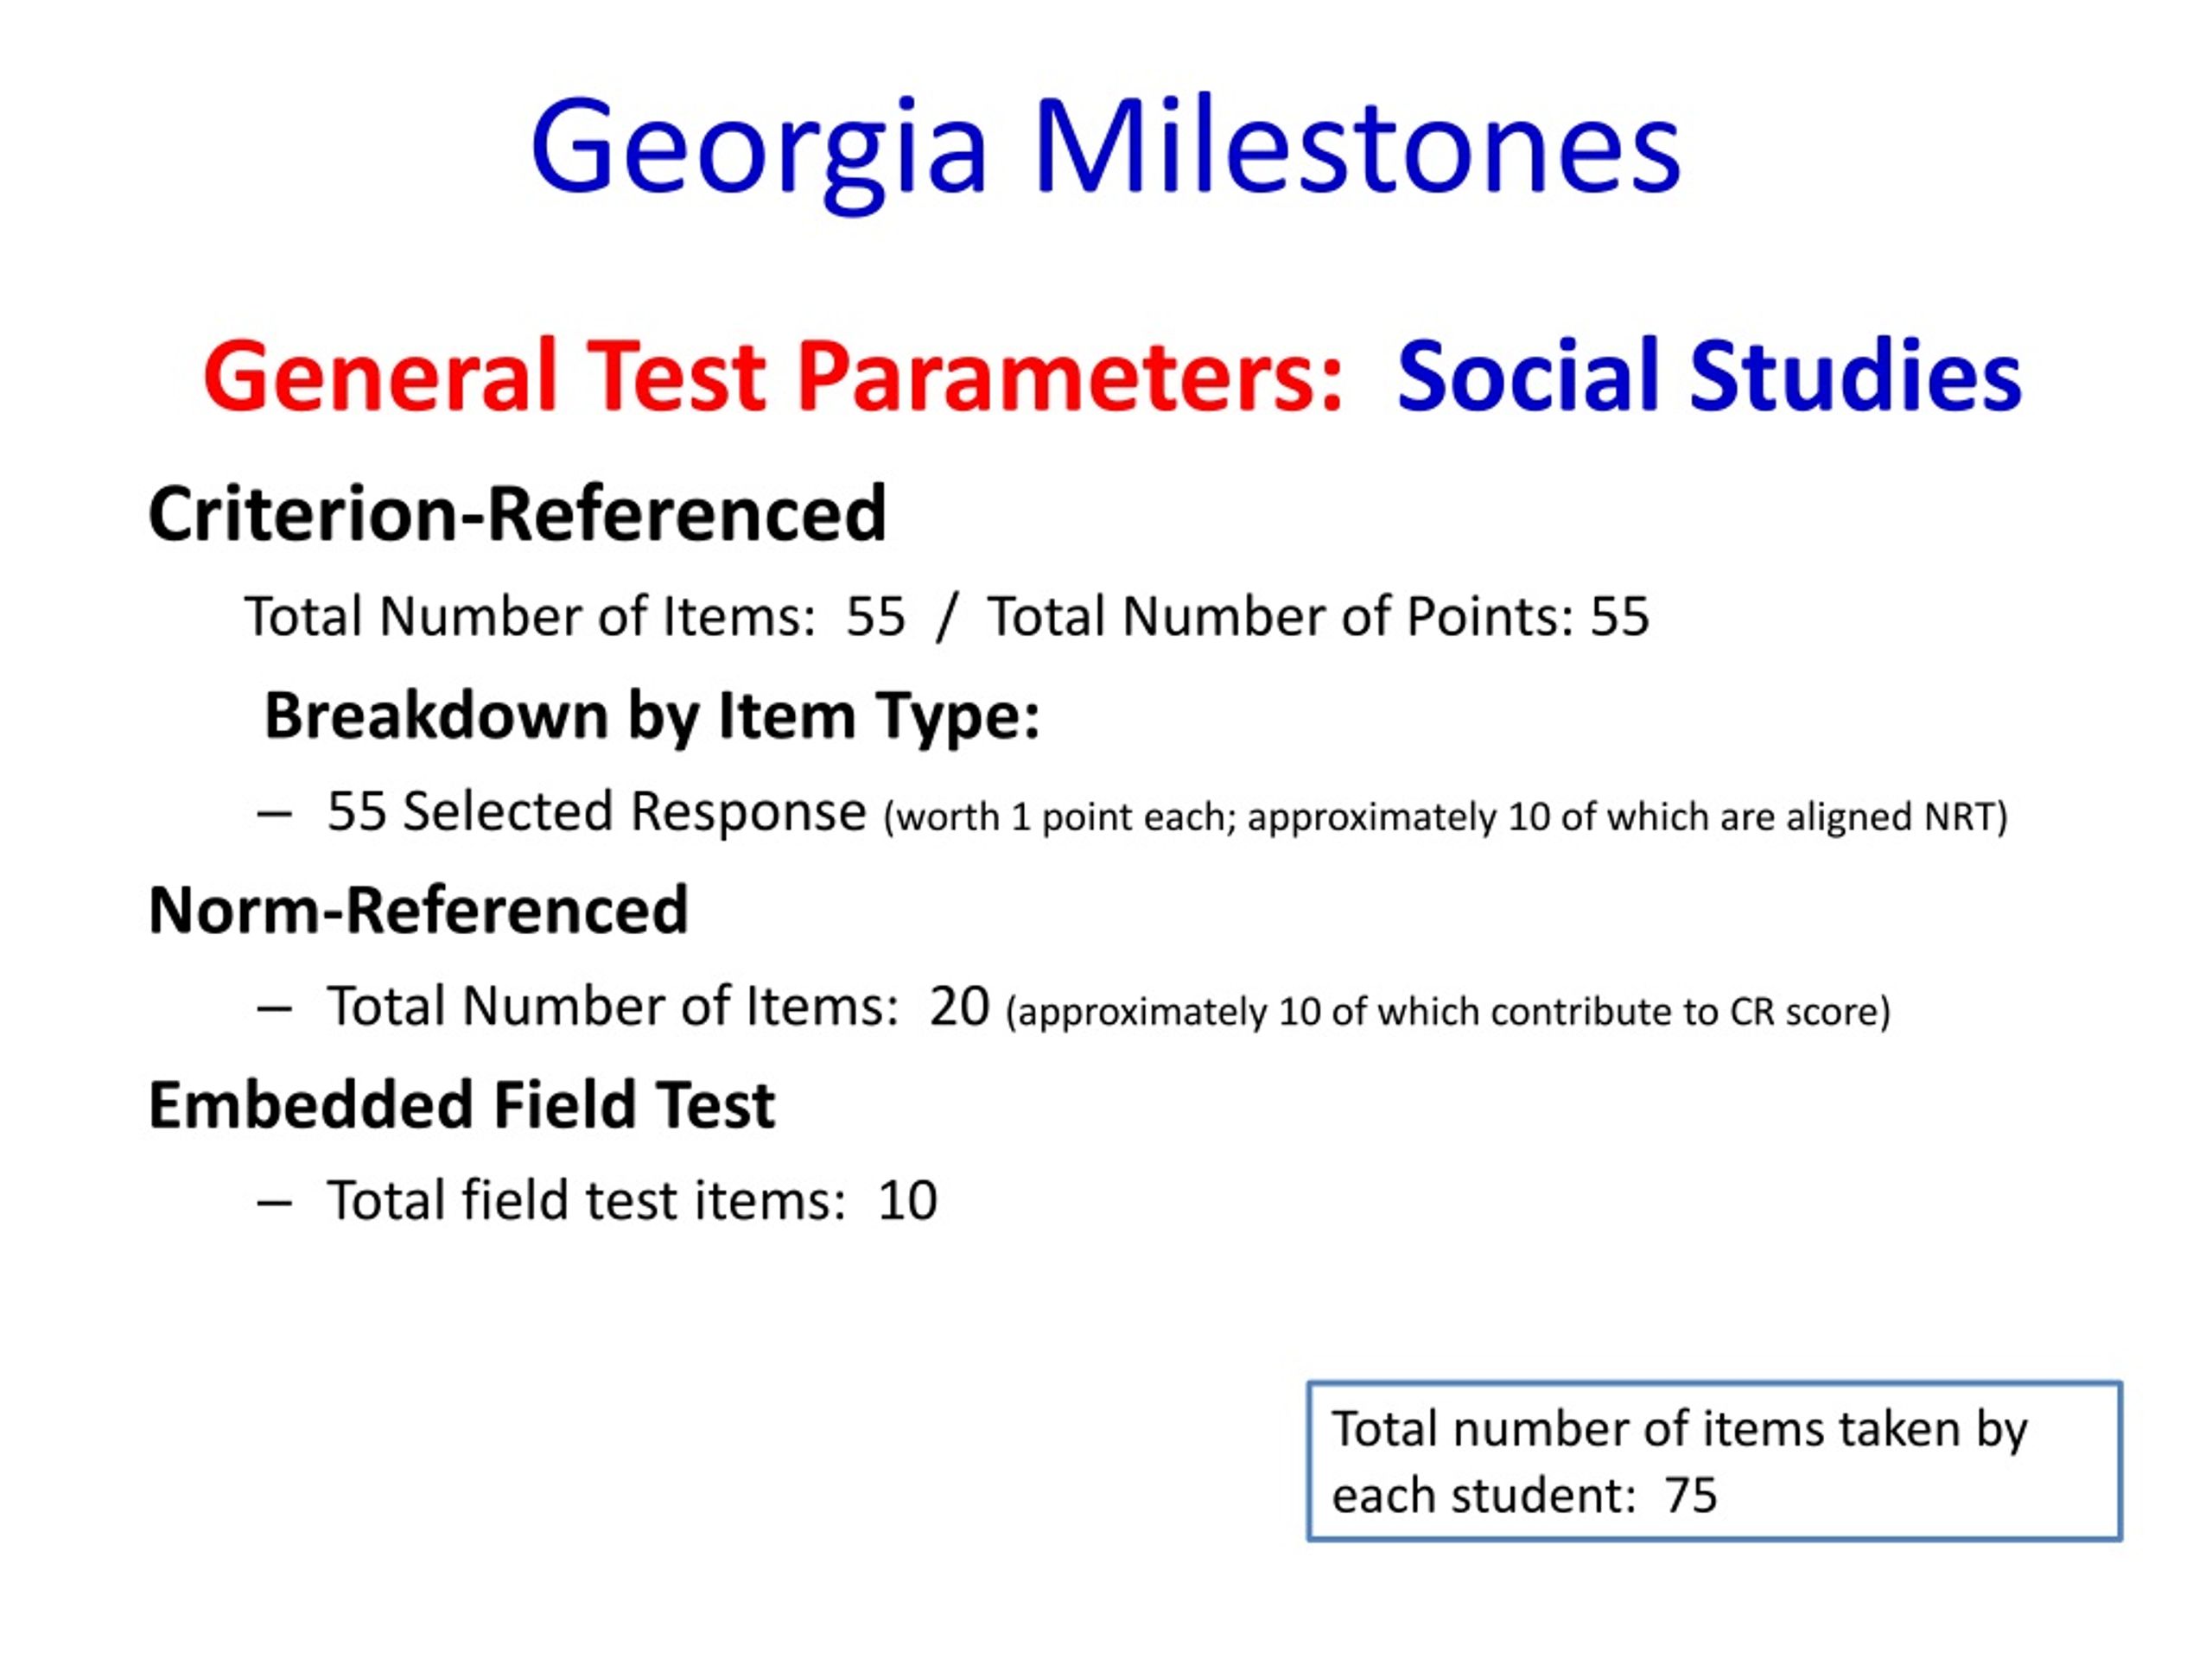 Ppt An Overview Of Georgia Milestones Powerpoint Presentation Free Download Id9020594 0472